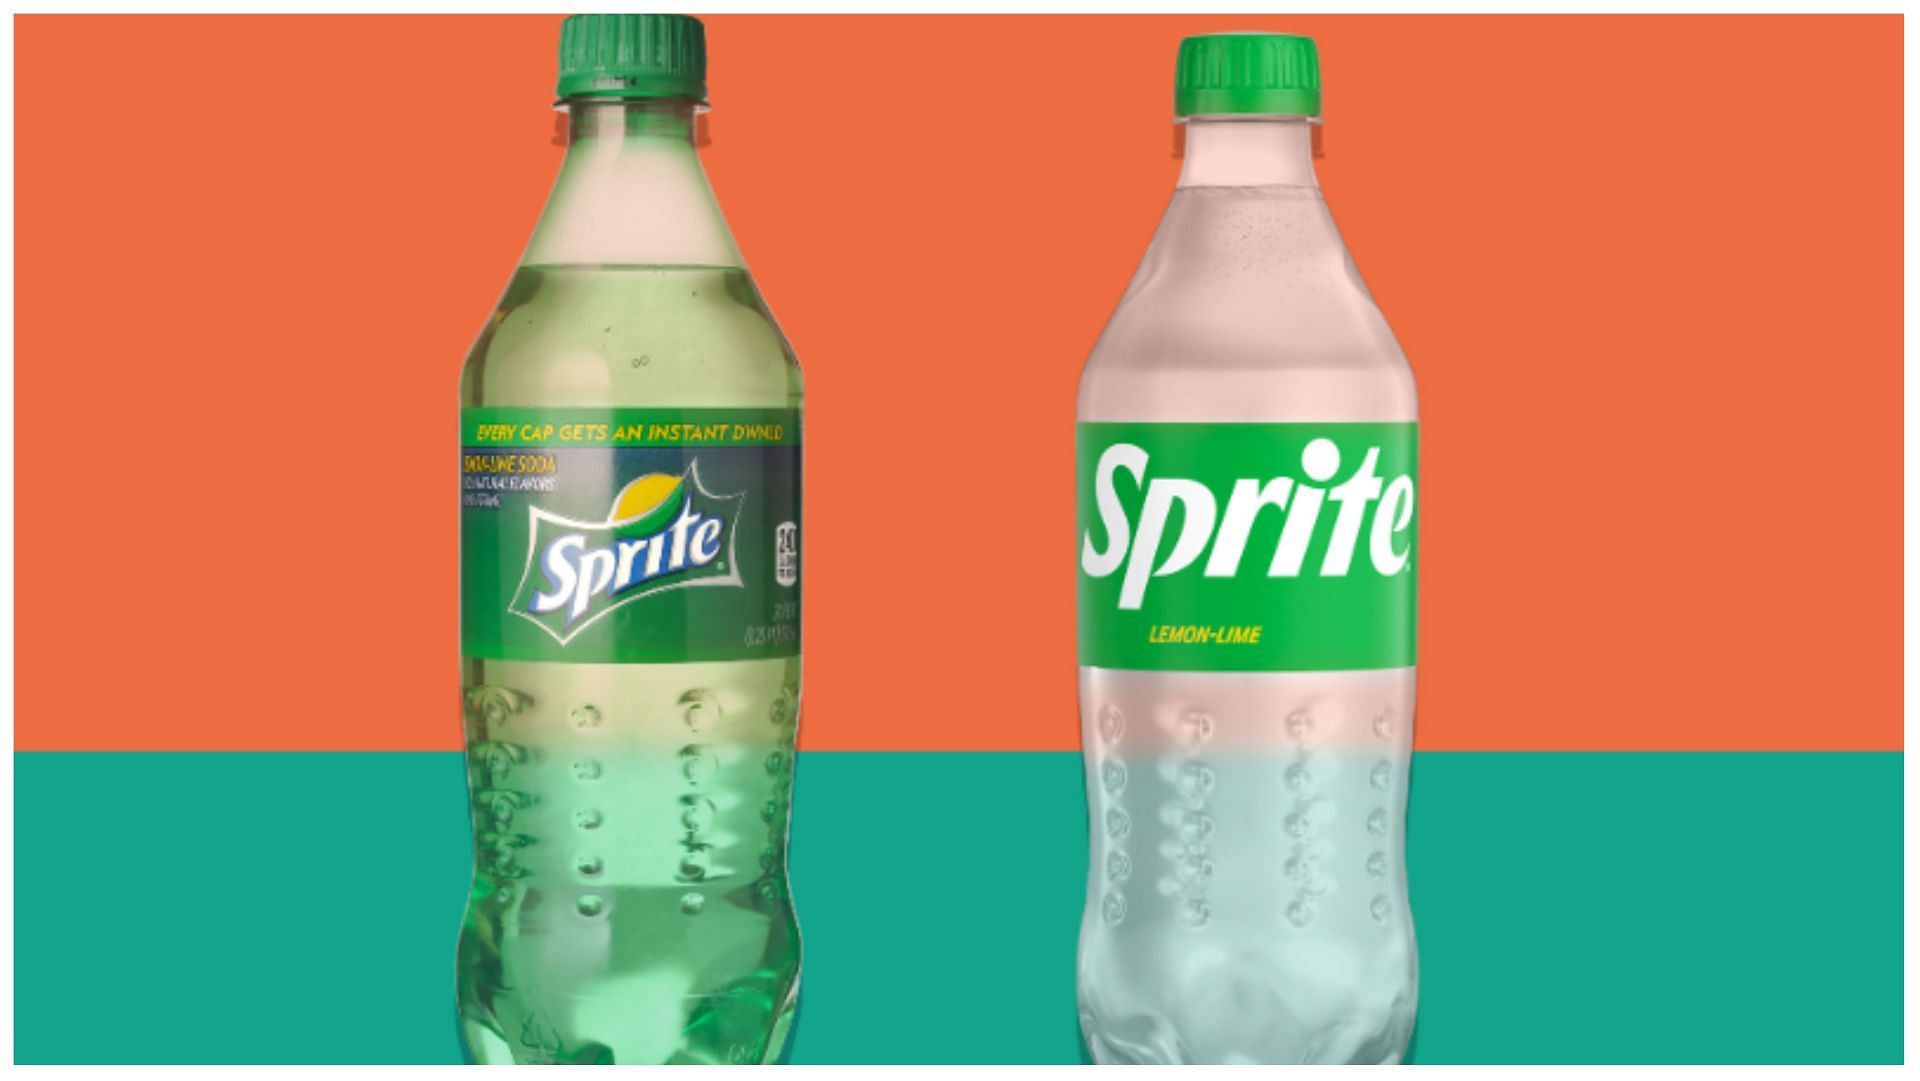 Coca-Cola will ditch Sprite&#039;s green bottle packaging for a clear bottle to be environmentally responsible (image via The Coca-Cola Company)